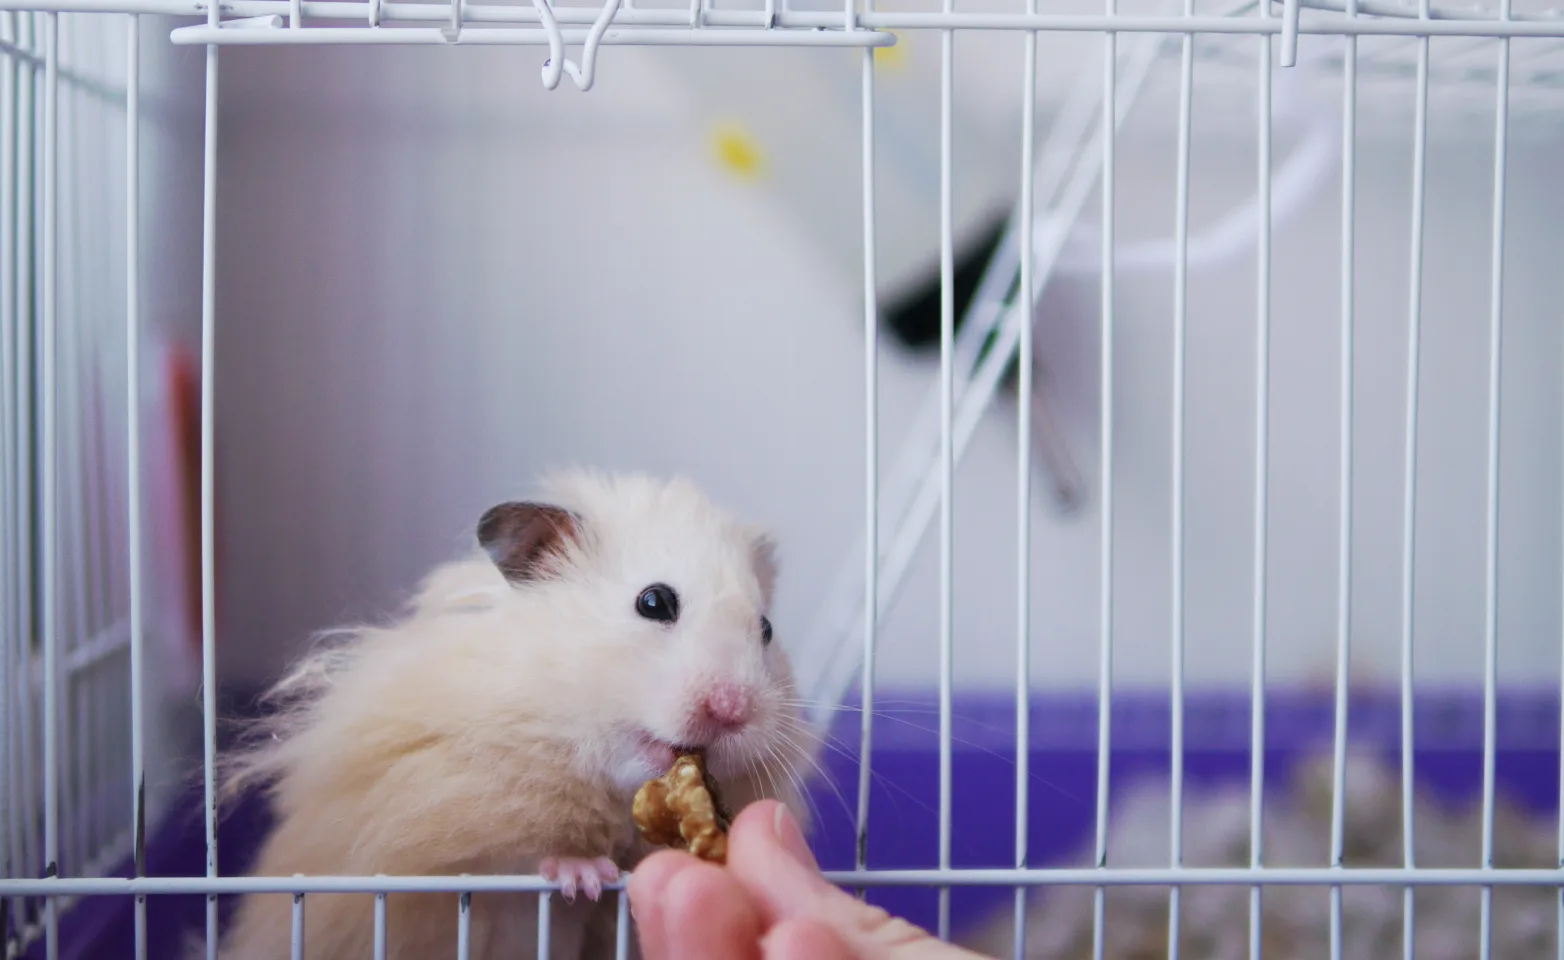 Hamster getting fed a treat inside cage